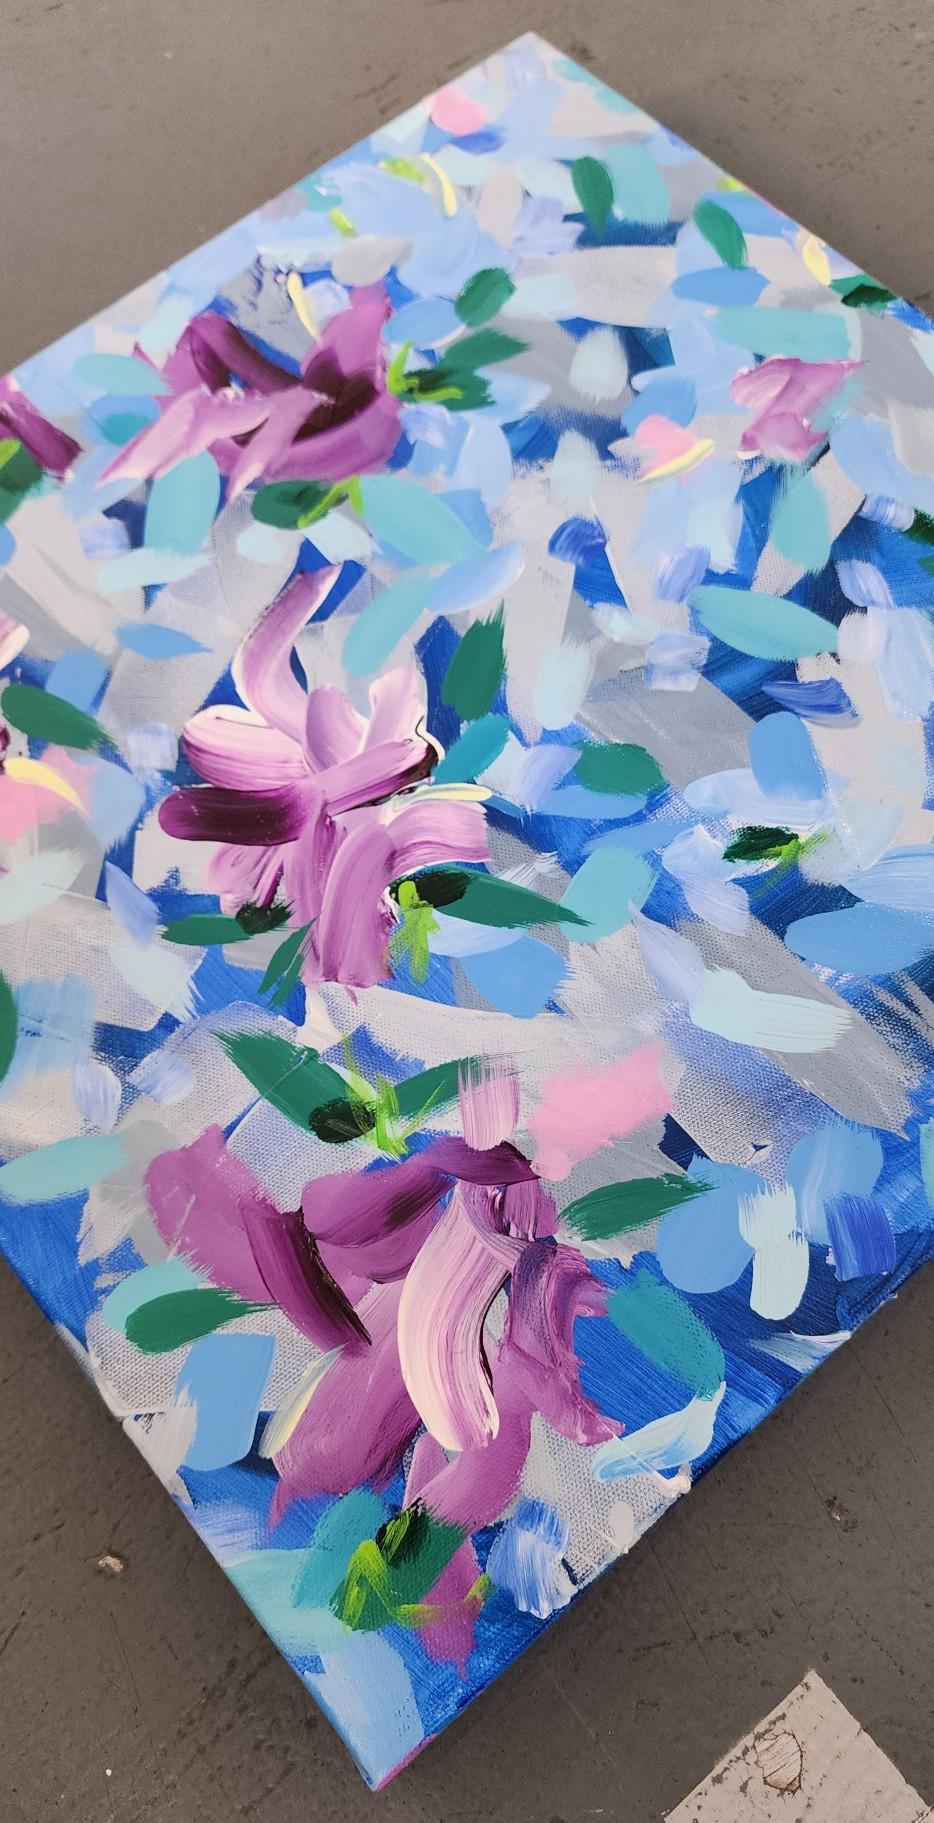 Lush '24 (Abstract, Floral, Blue, Pink, Rose, Purple, Landscape, Garden) - Impressionist Painting by Kimberly Marney